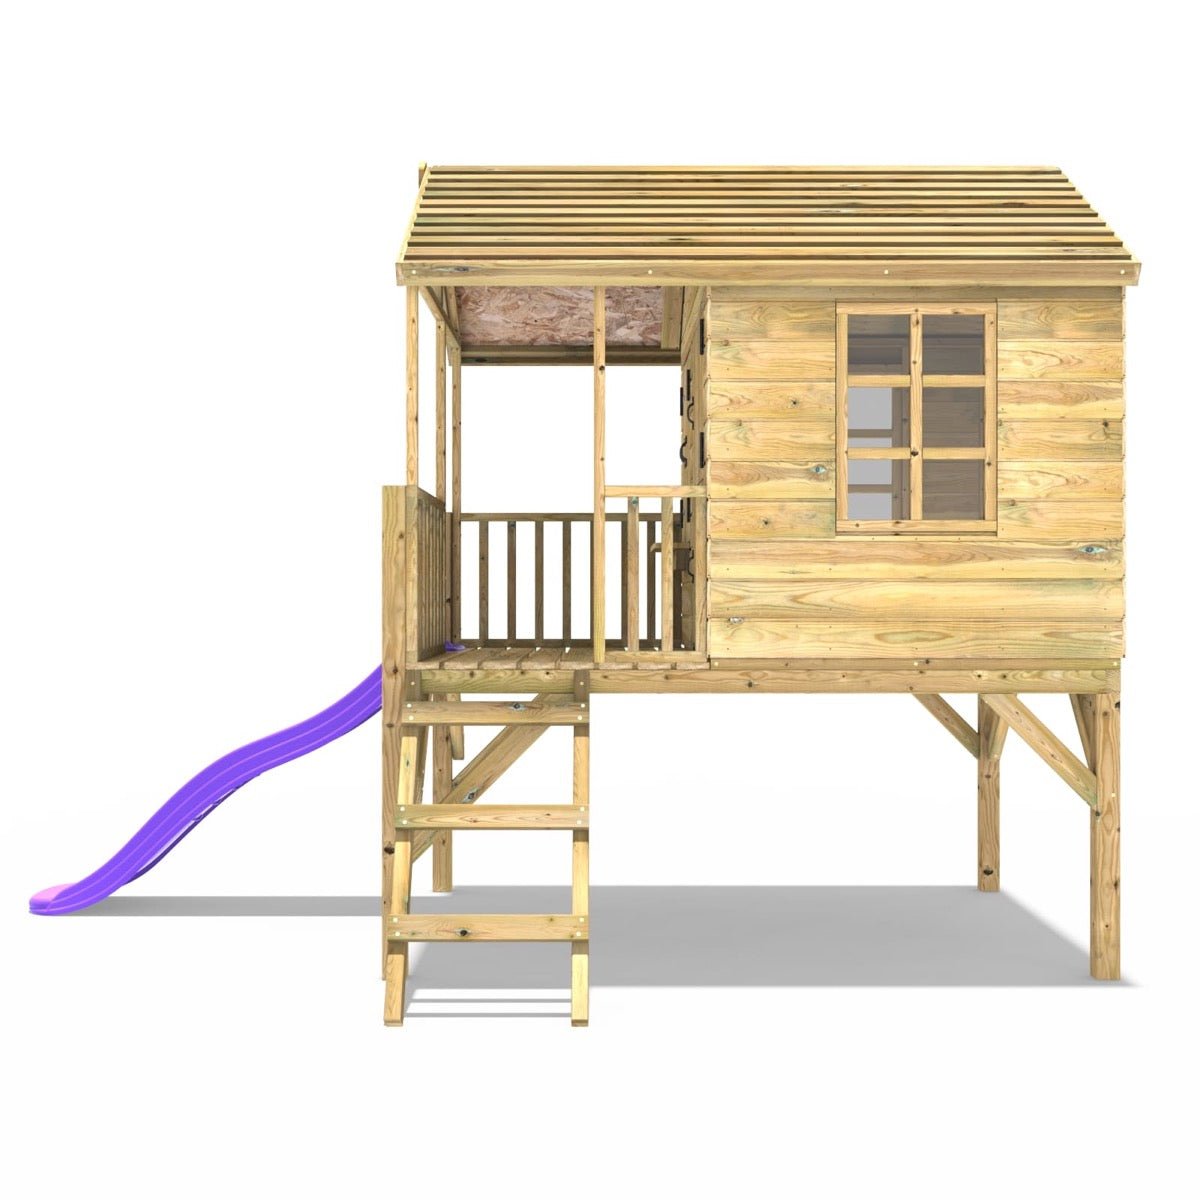 Rebo 5FT x 5FT Childrens Wooden Garden Playhouse on Deck with 6ft Slide - Falcon Purple